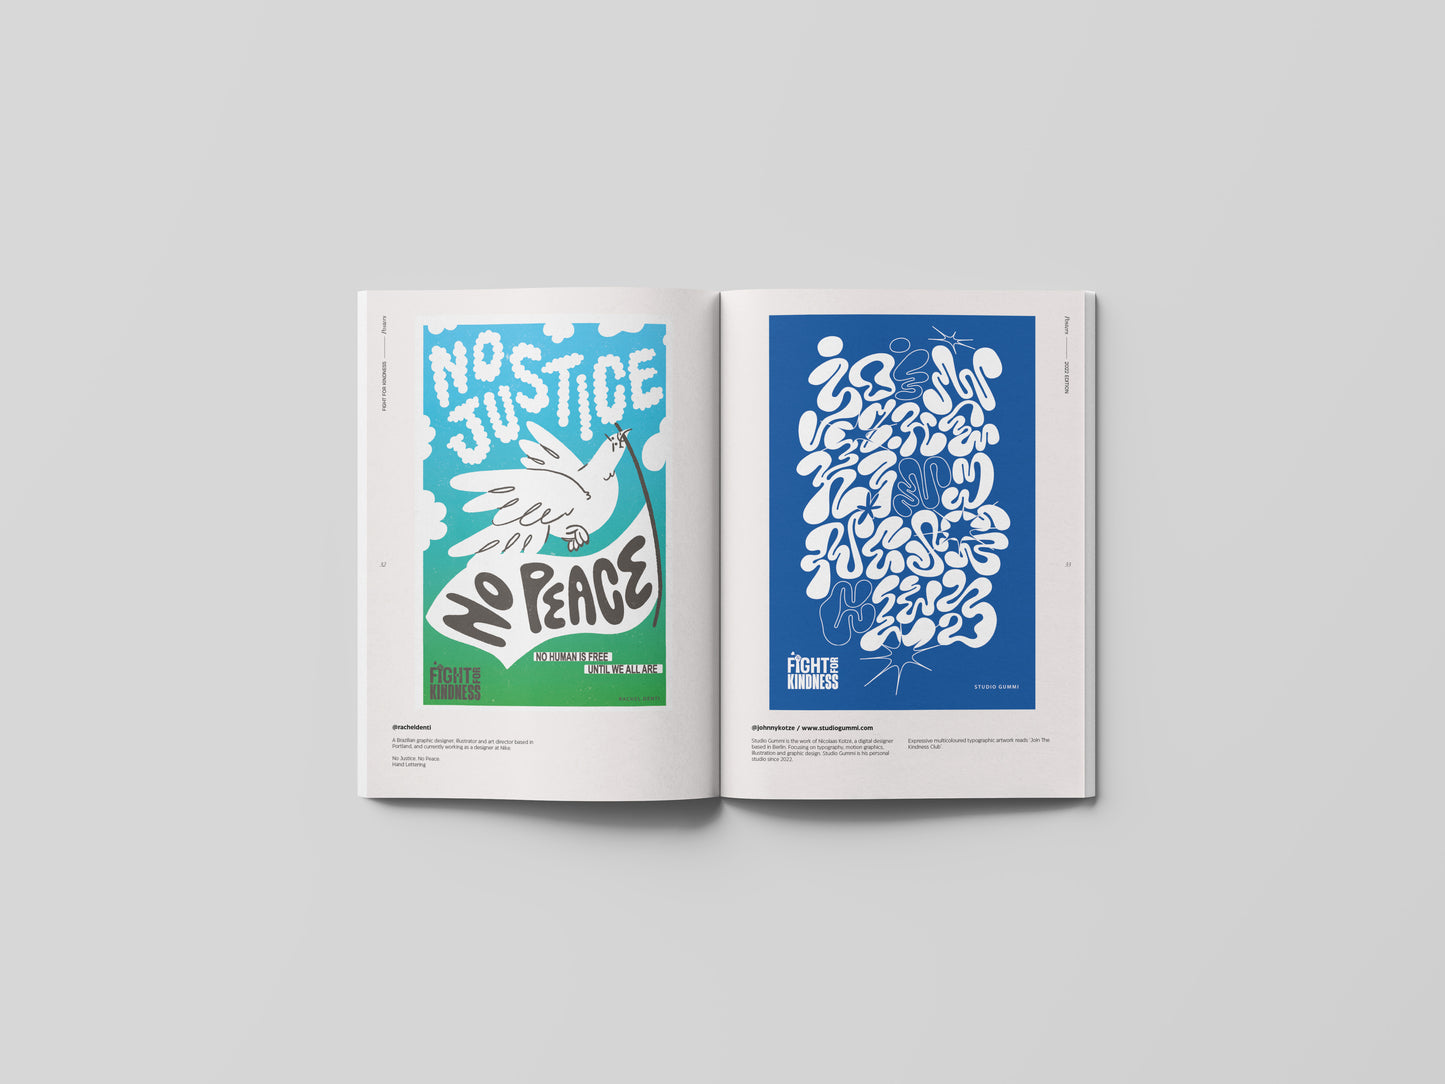 Fight for Kindness 2022 Book-zine by TypeCampus